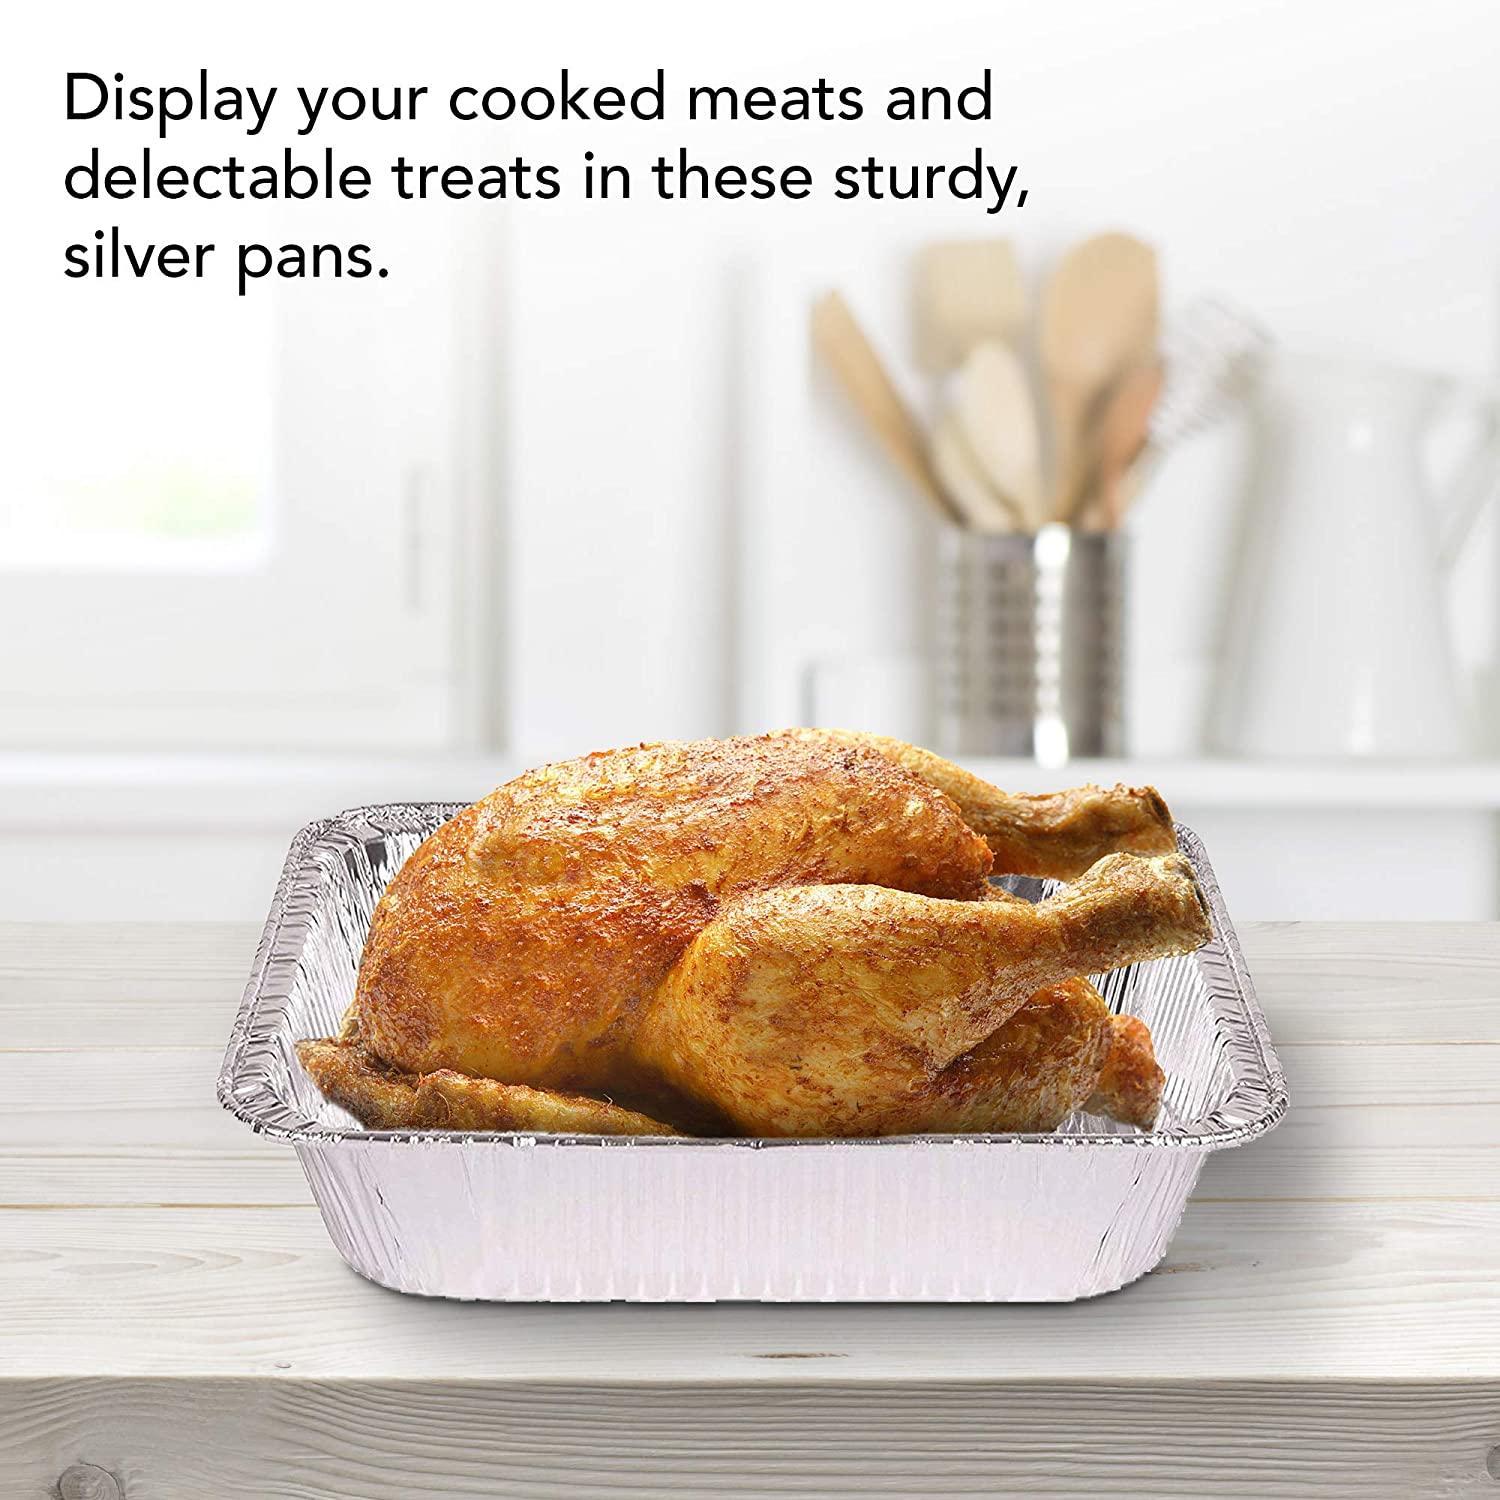 Aluminum Pans 9 X 13 Disposable Foil Pans Half Size Deep Steam Table Pans -  Tin Foil Pans Great for Cooking, Heating, Storing and Food Prepping 